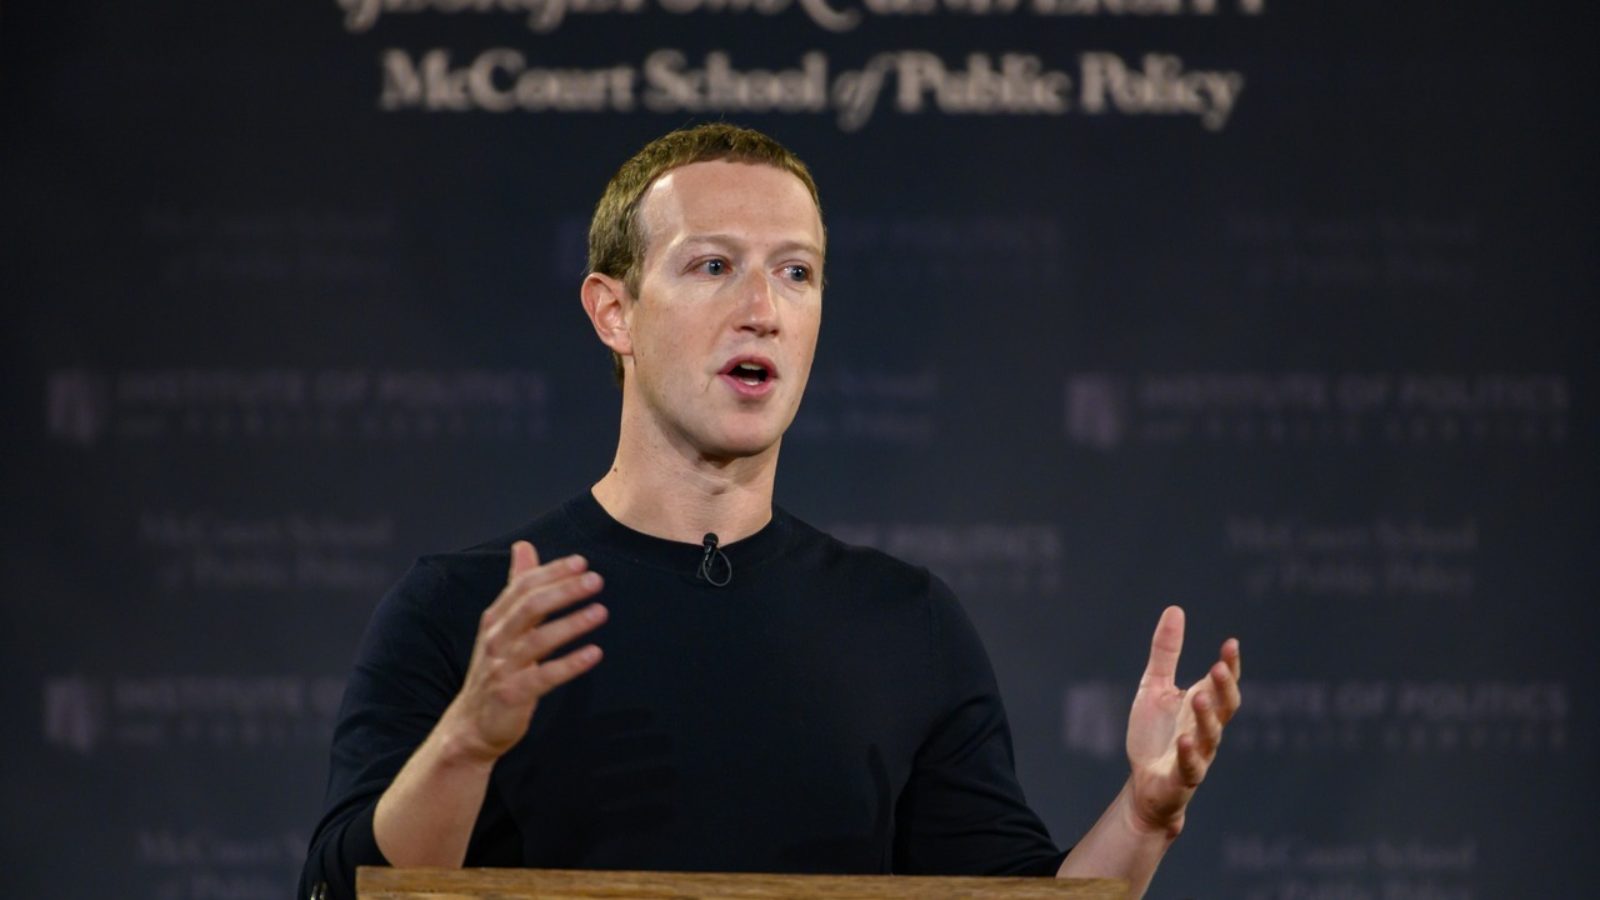 Mark Zuckerberg speaks at a lectern with a blue banner displaying &quot;Georgetown University McCourt School of Public Policy.